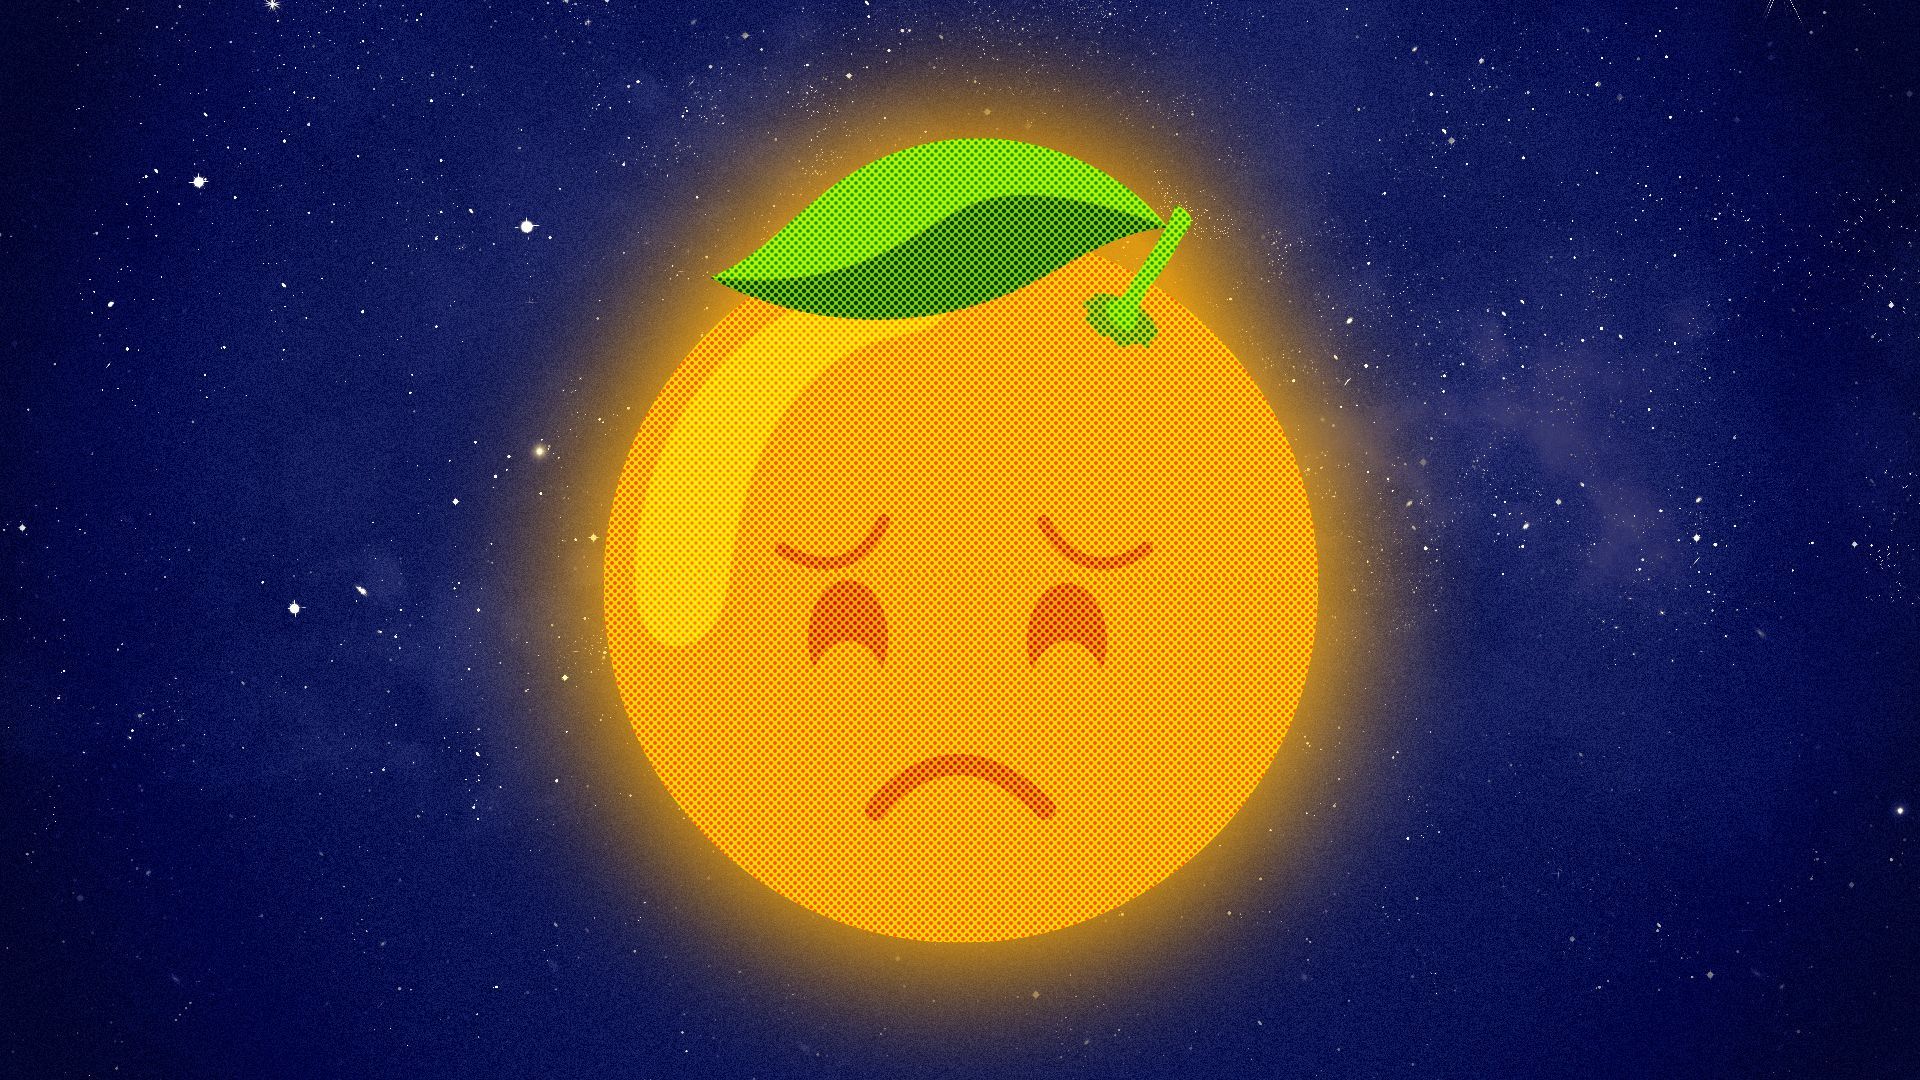 Illustration of a frowning orange emoji glowing like the moon against the night sky.